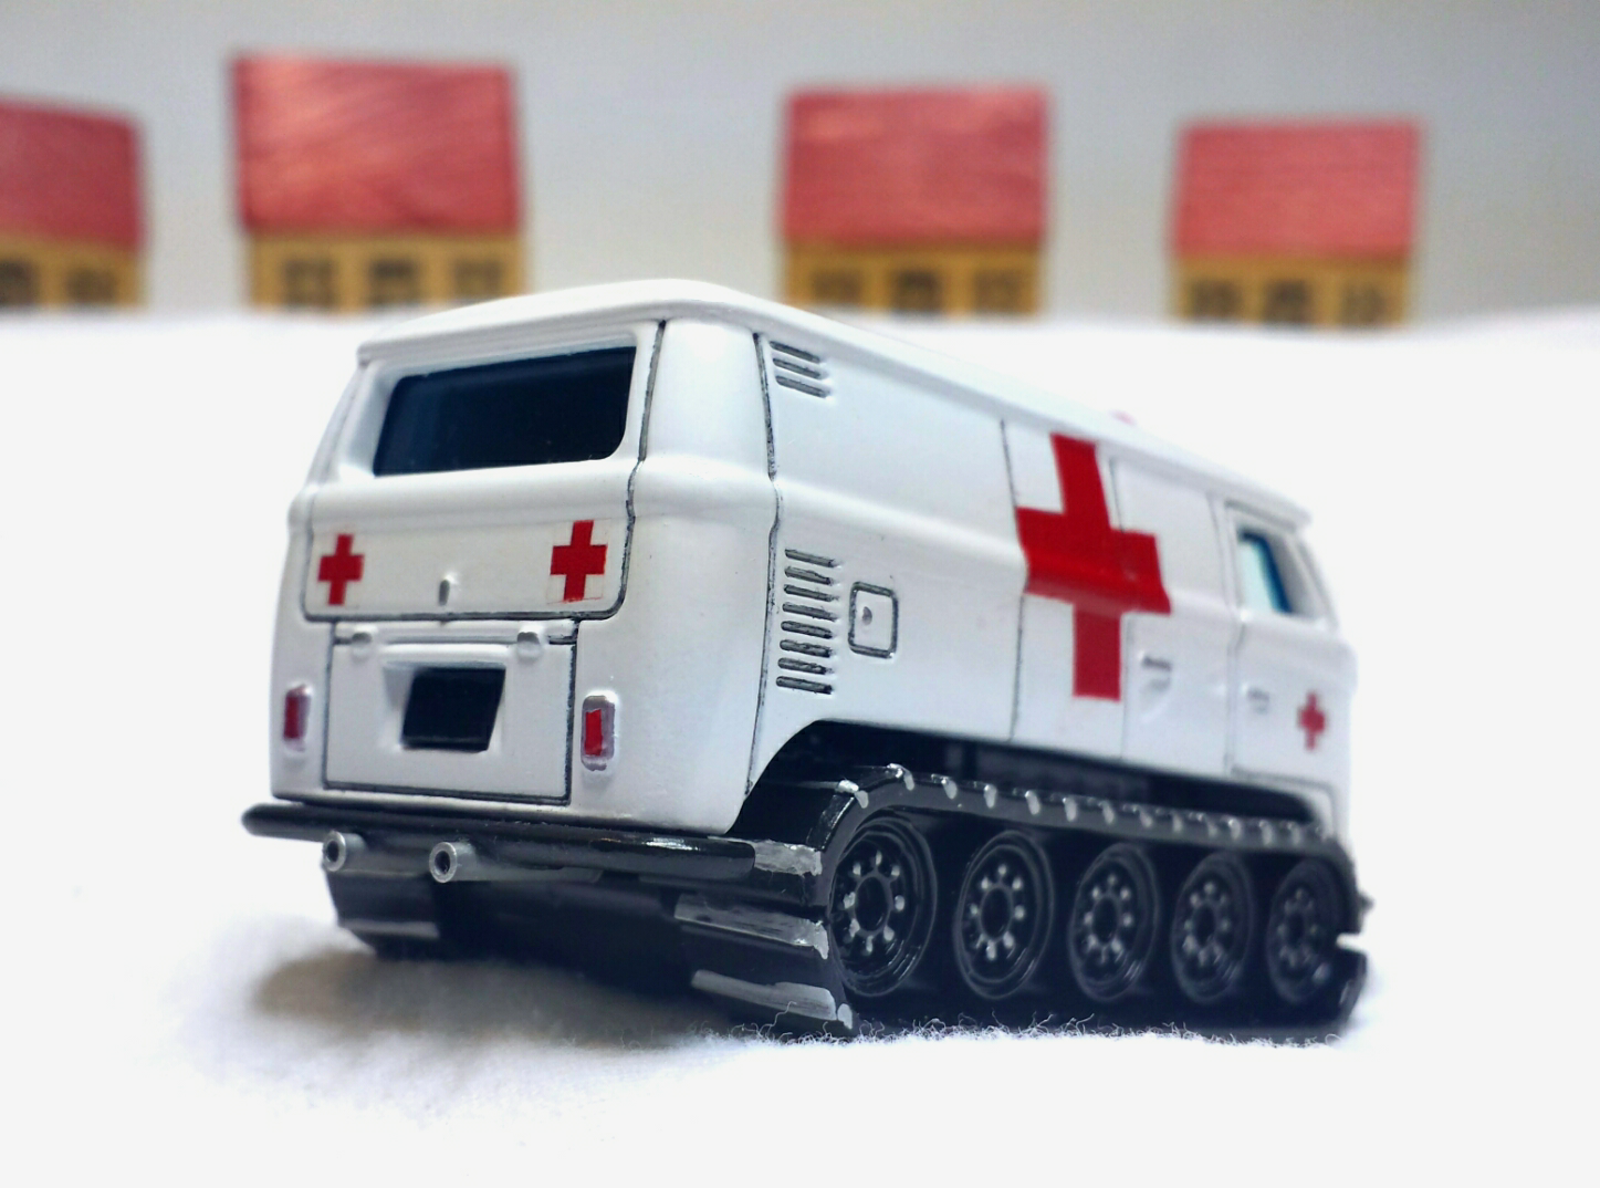 Illustration for article titled Alpine Ambulance: The Complete Superfly Contest Build